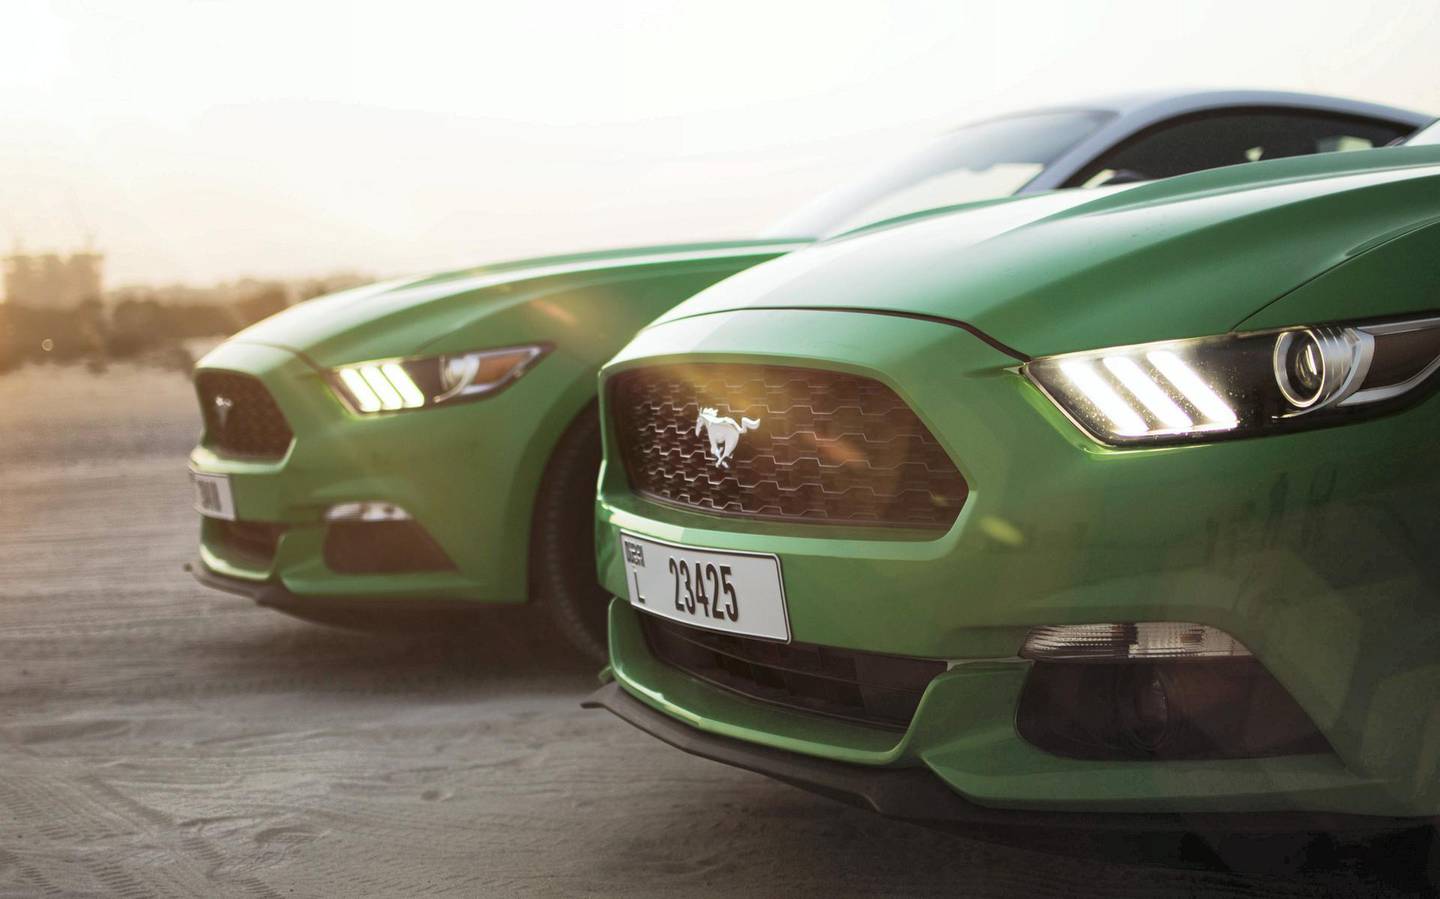 Mustangs are now on the Udrive fleet. Udrive